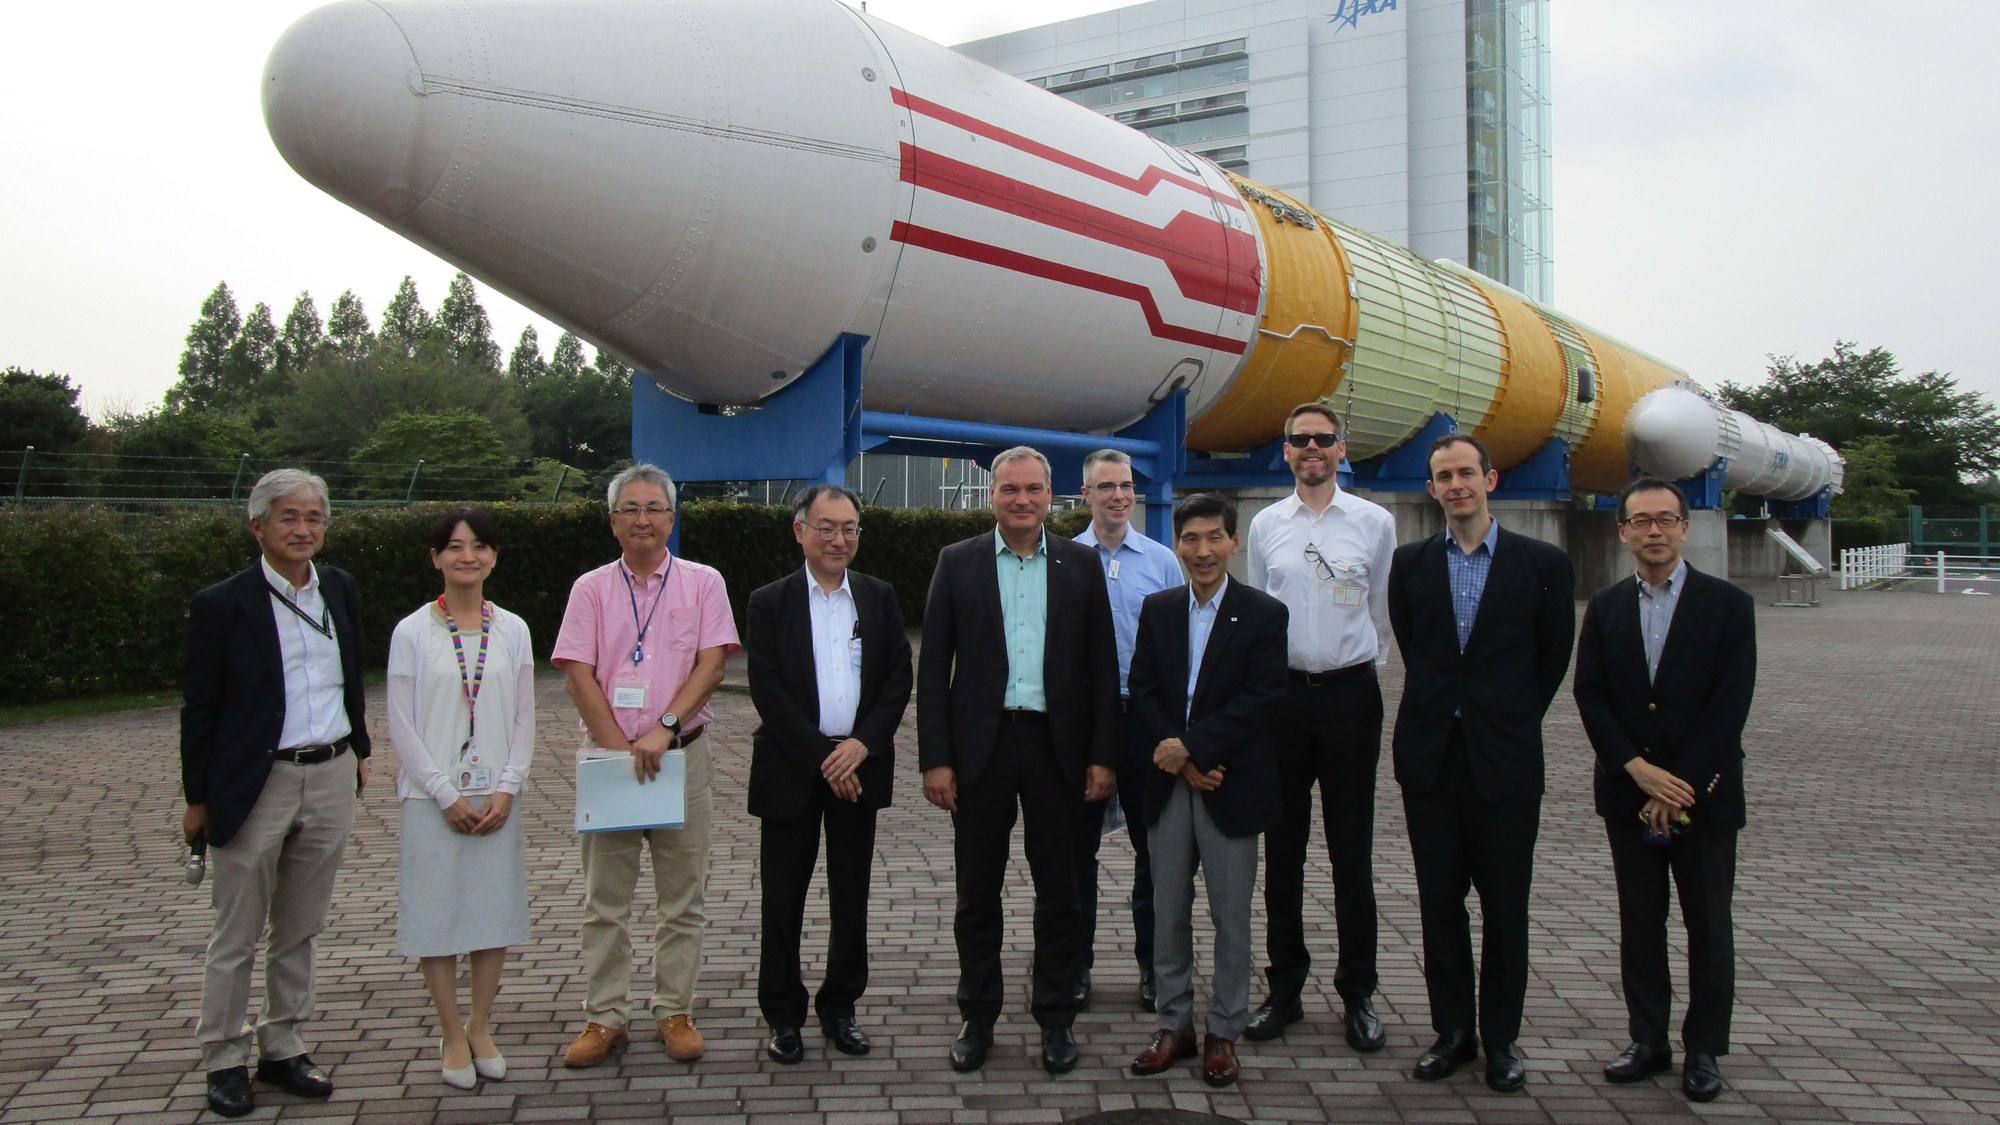 The DLR delegation during a visit to the JAXA Tsukuba Space Centre on 31 July 2019.